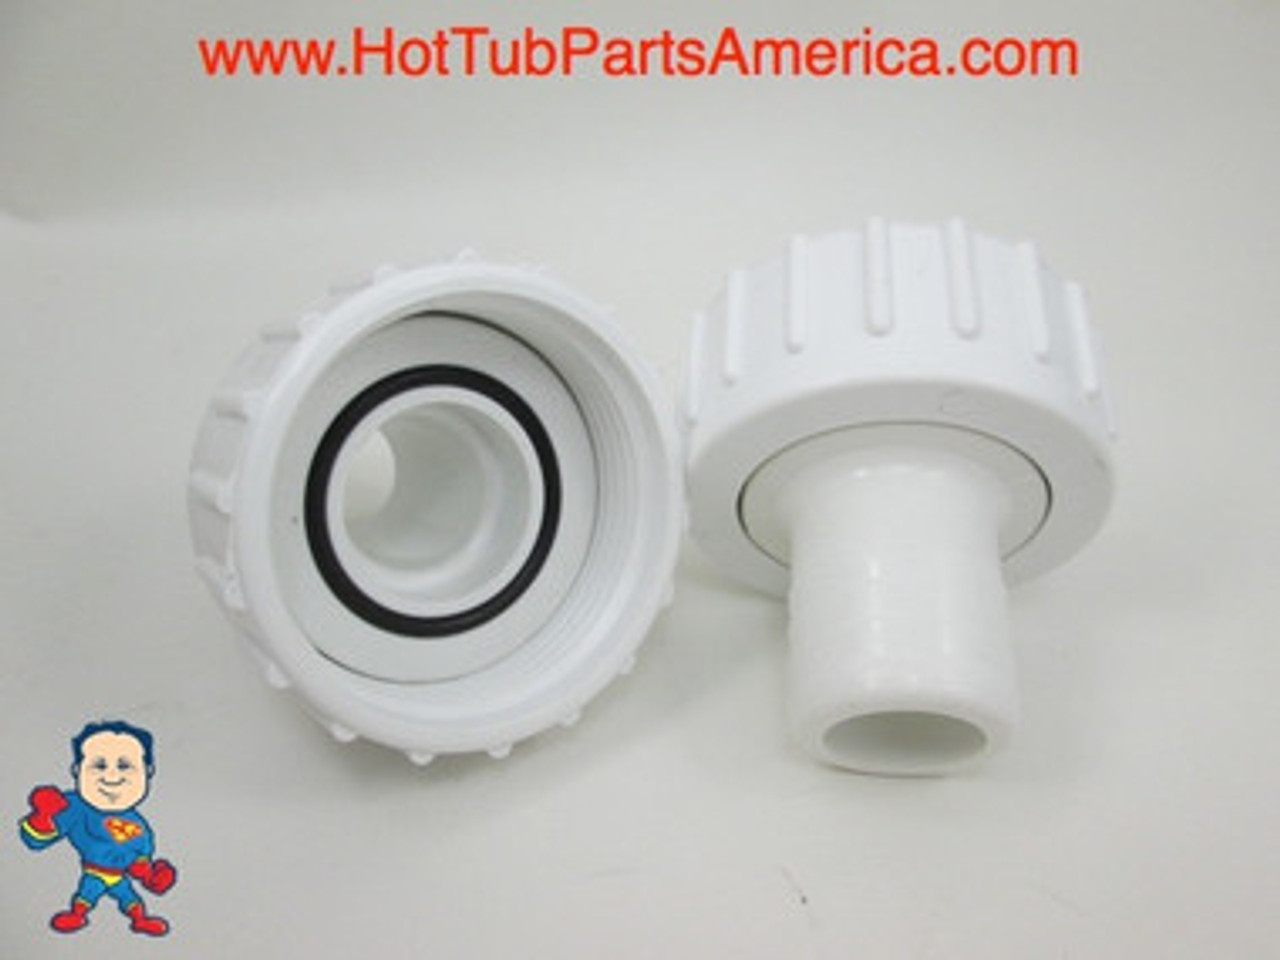 Set of 2 Hot Tub Spa 1" X 1" Barb Pump Union O-Ring Tiny Might others Video